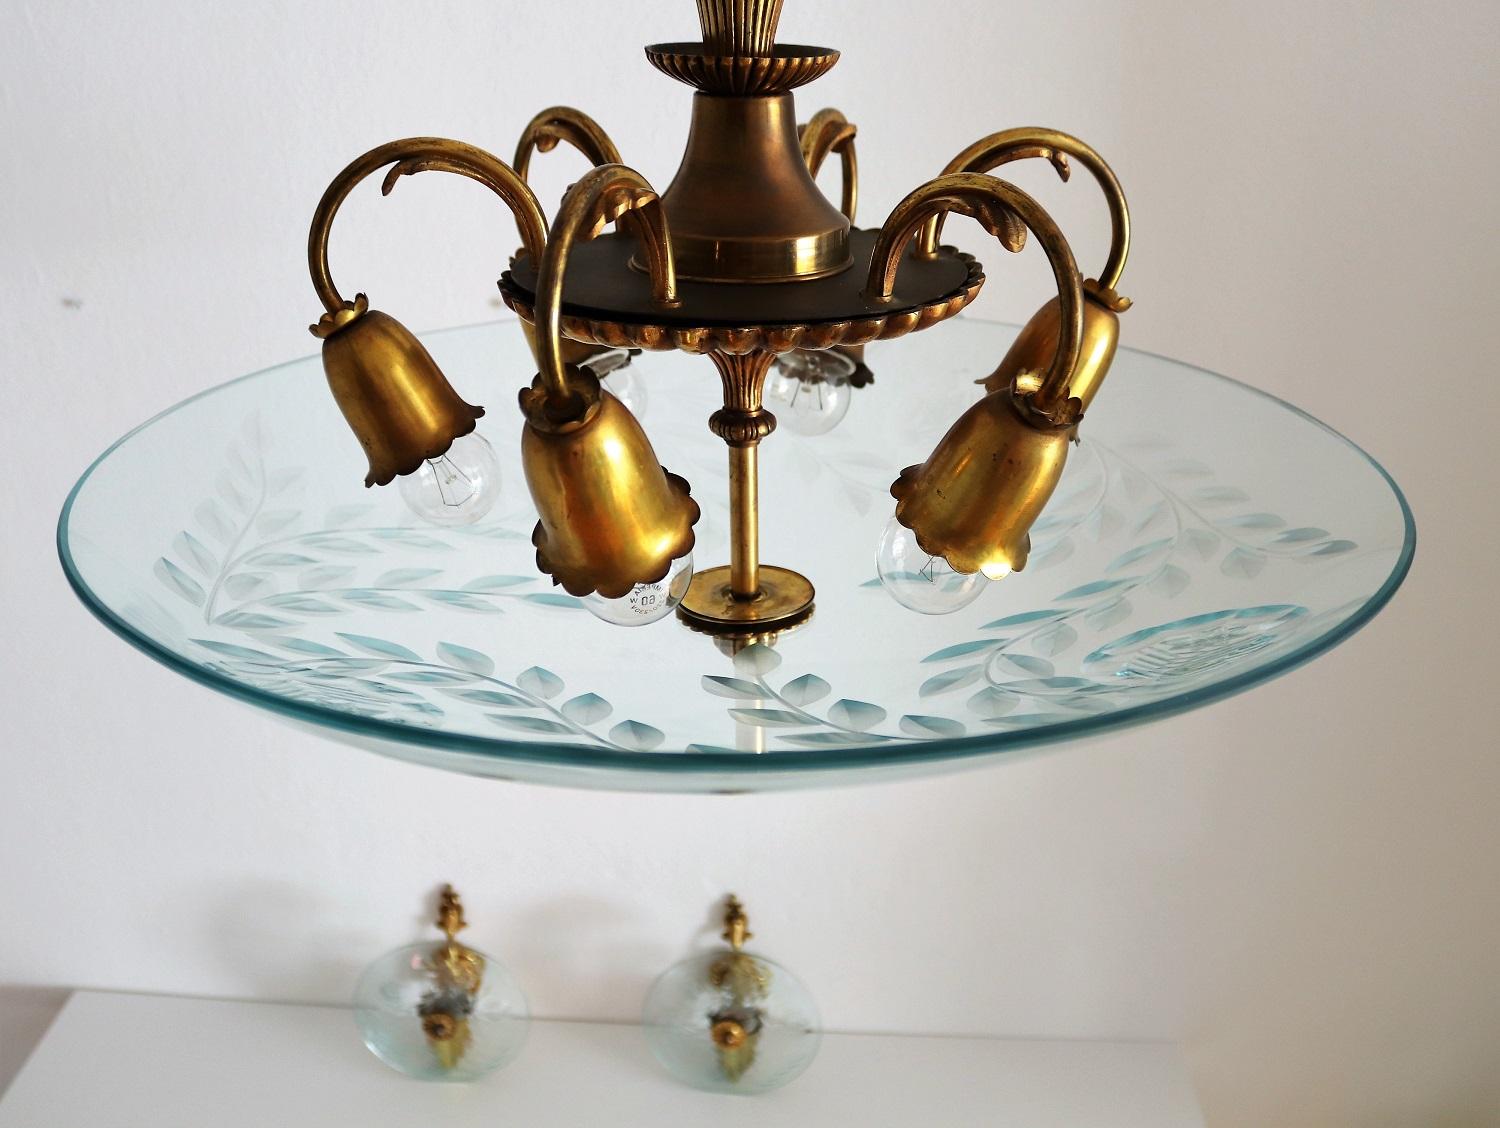 Italian Midcentury Brass and Crystal Glass Chandelier, 1950s For Sale 13